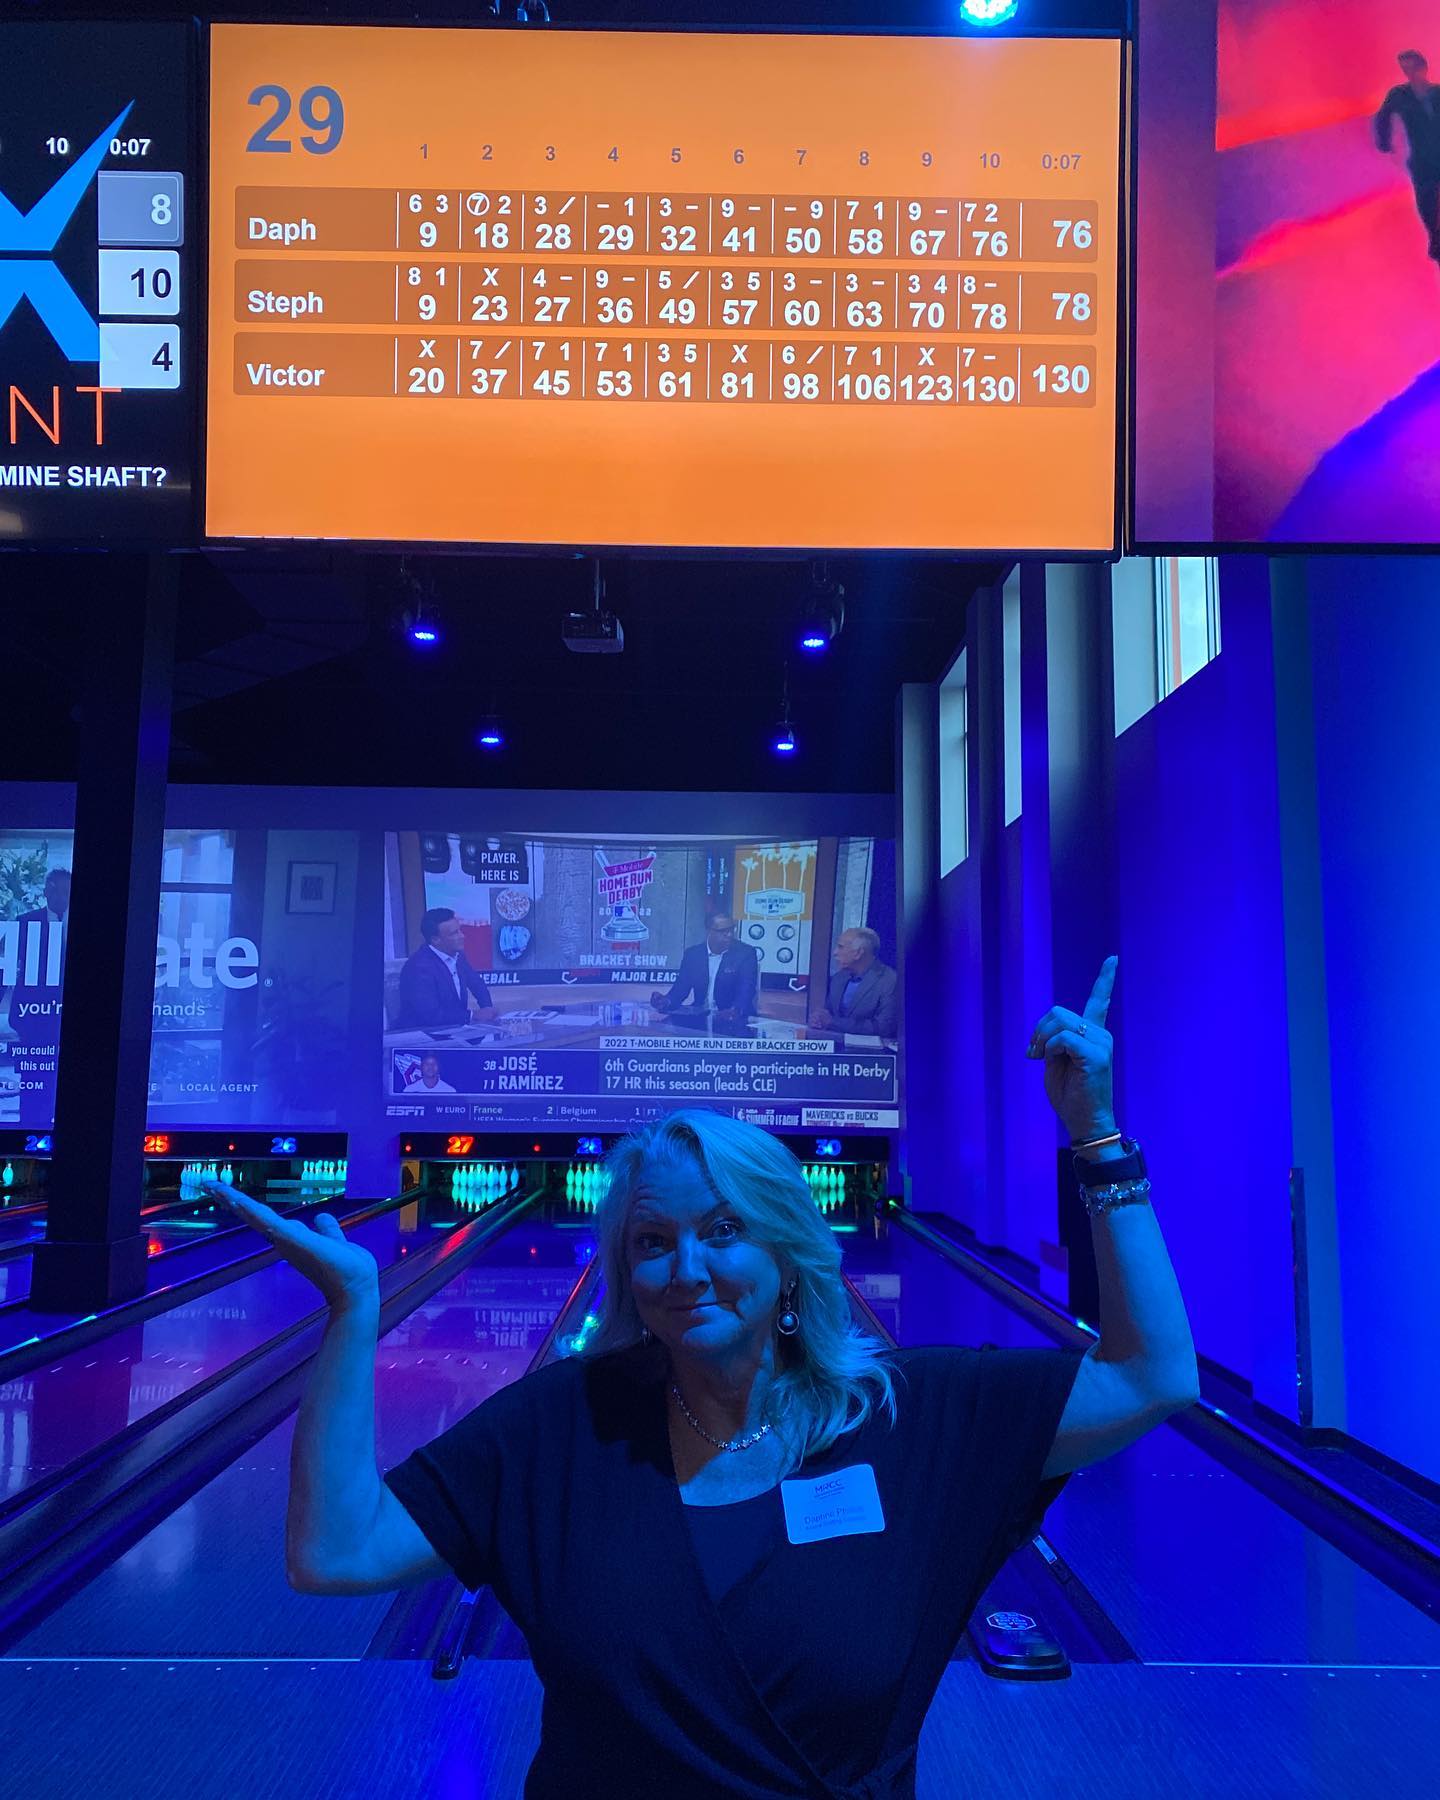 Ok, so bowling isn’t my sport…but I still had a great time at this MRCC mixer at the APEX.  @ardentstaffing @marlboroughchamber @apexentertainmentt